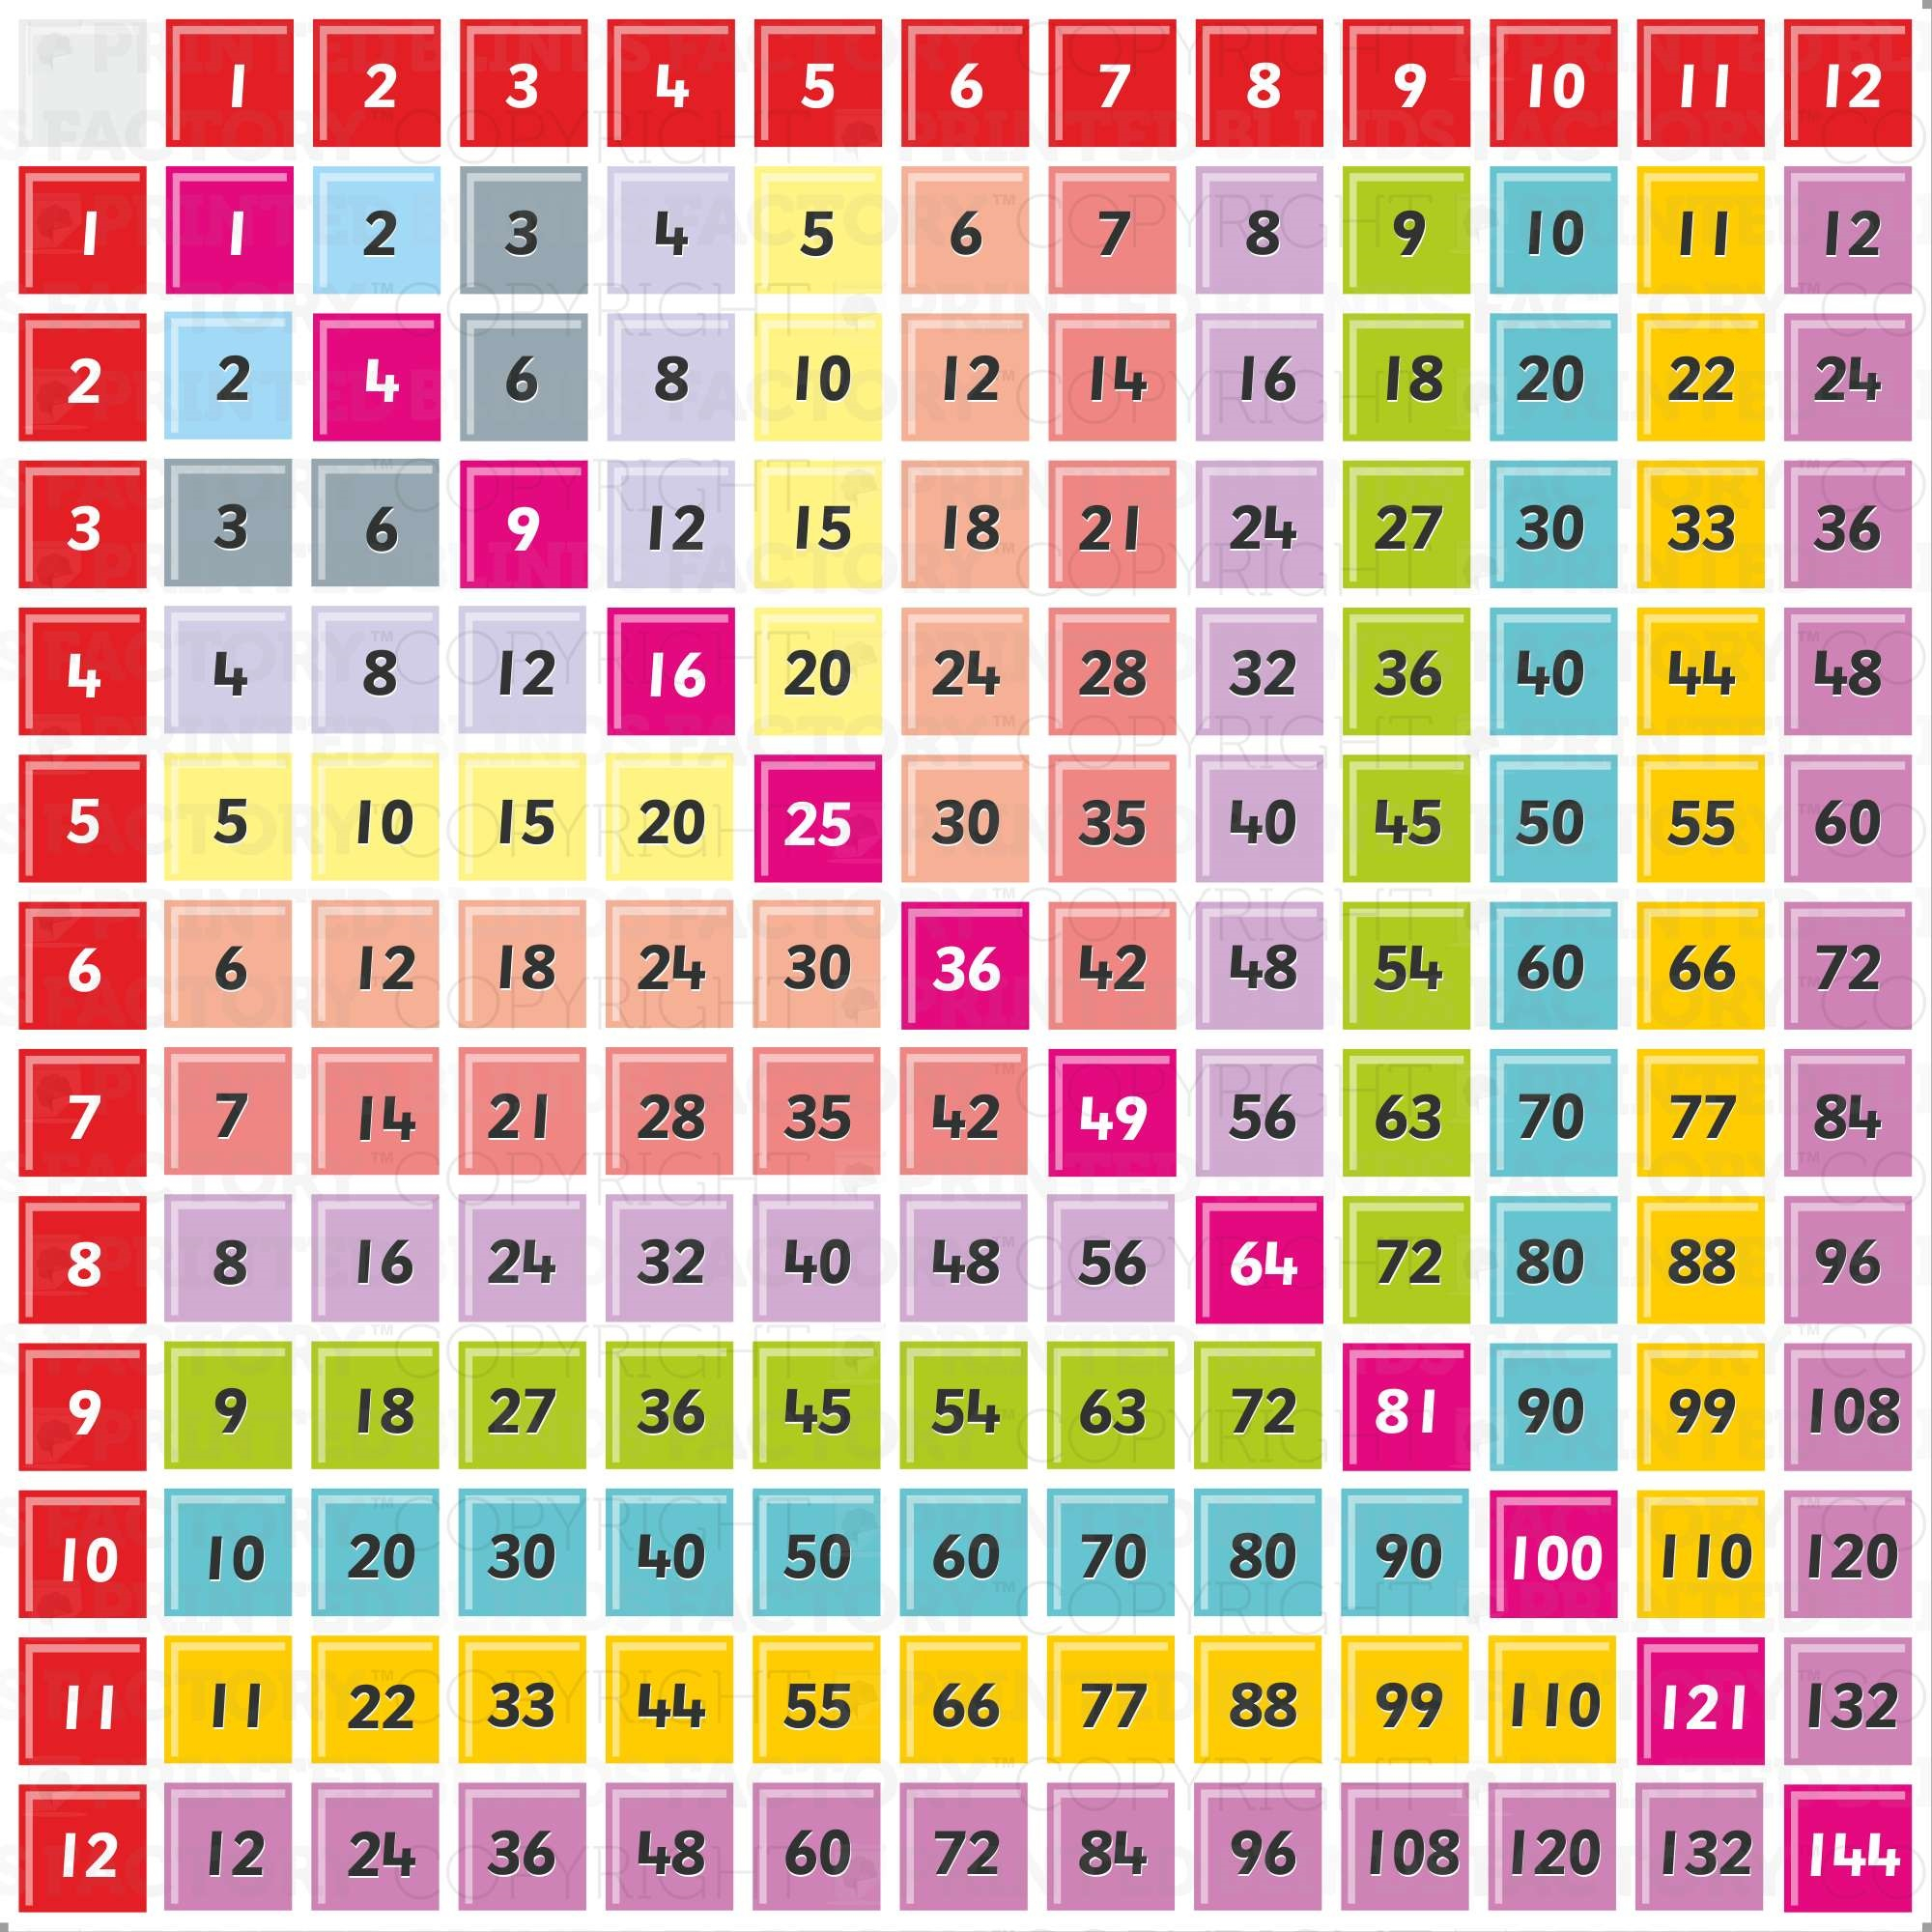 10 Multiplication Table 25X25 intended for Printable Multiplication Table 25X25